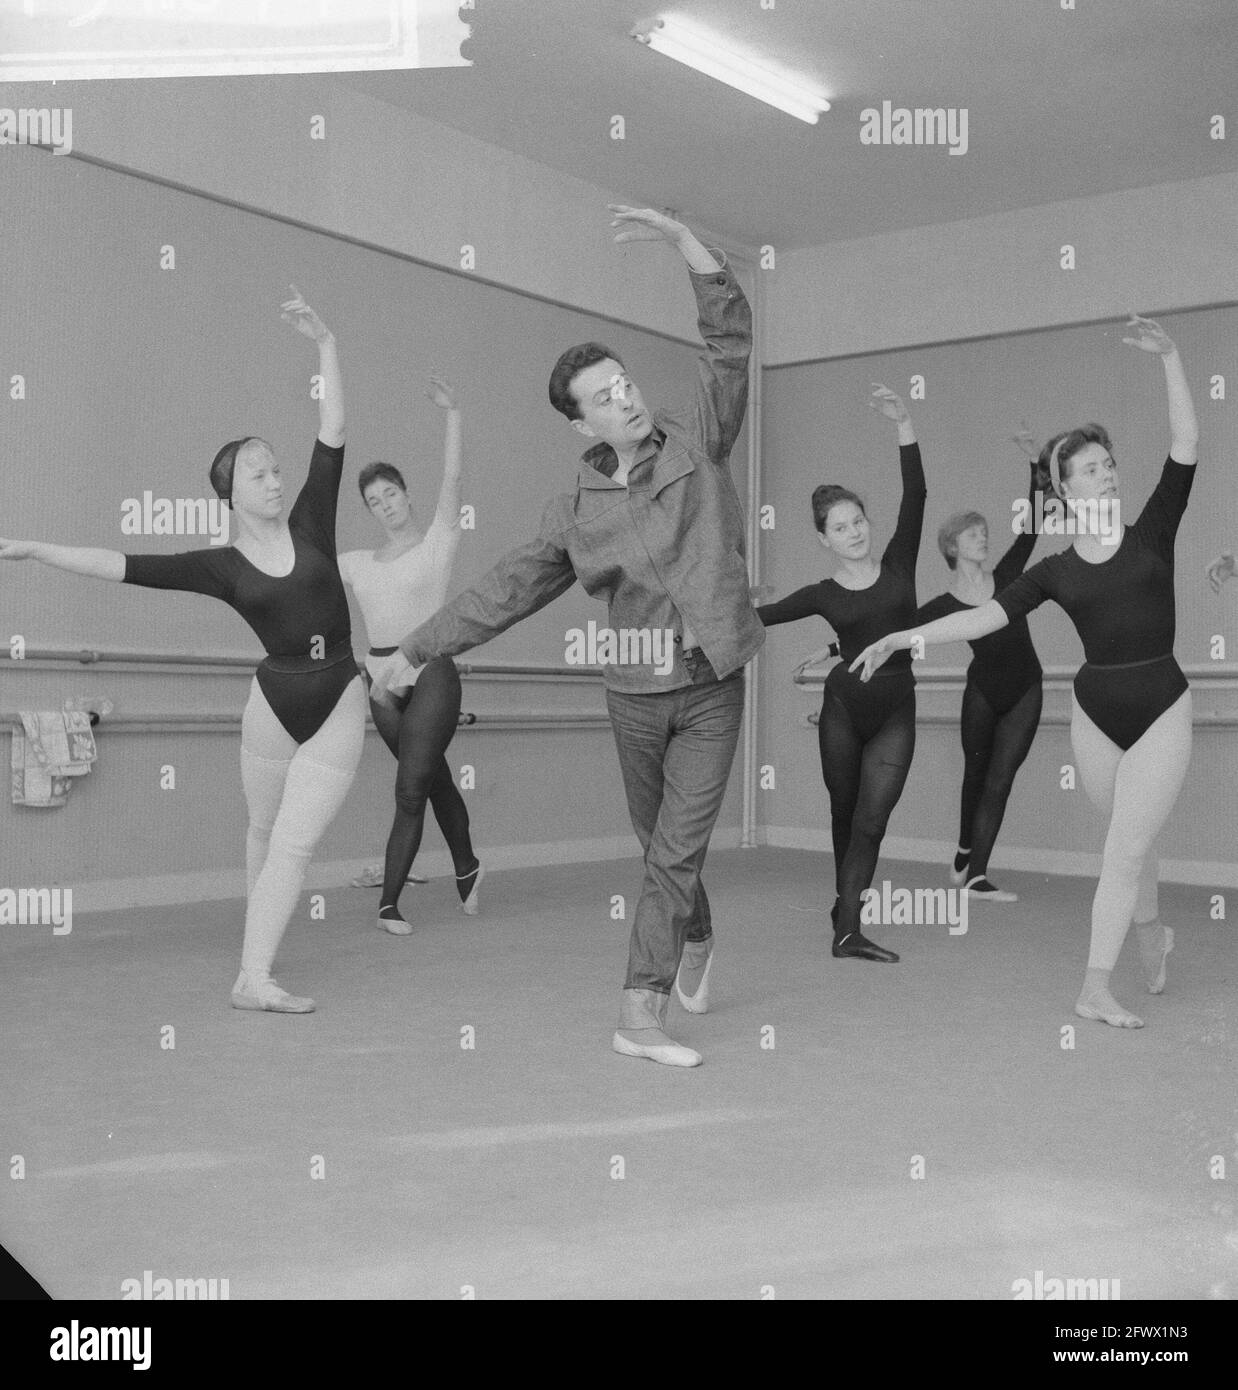 English choreographer Michel Holmes at Rotterdam Ballet Academy . Michel Holmes during rehearsals, October 27, 1961, REPETIONS, The Netherlands, 20th century press agency photo, news to remember, documentary, historic photography 1945-1990, visual stories, human history of the Twentieth Century, capturing moments in time Stock Photo